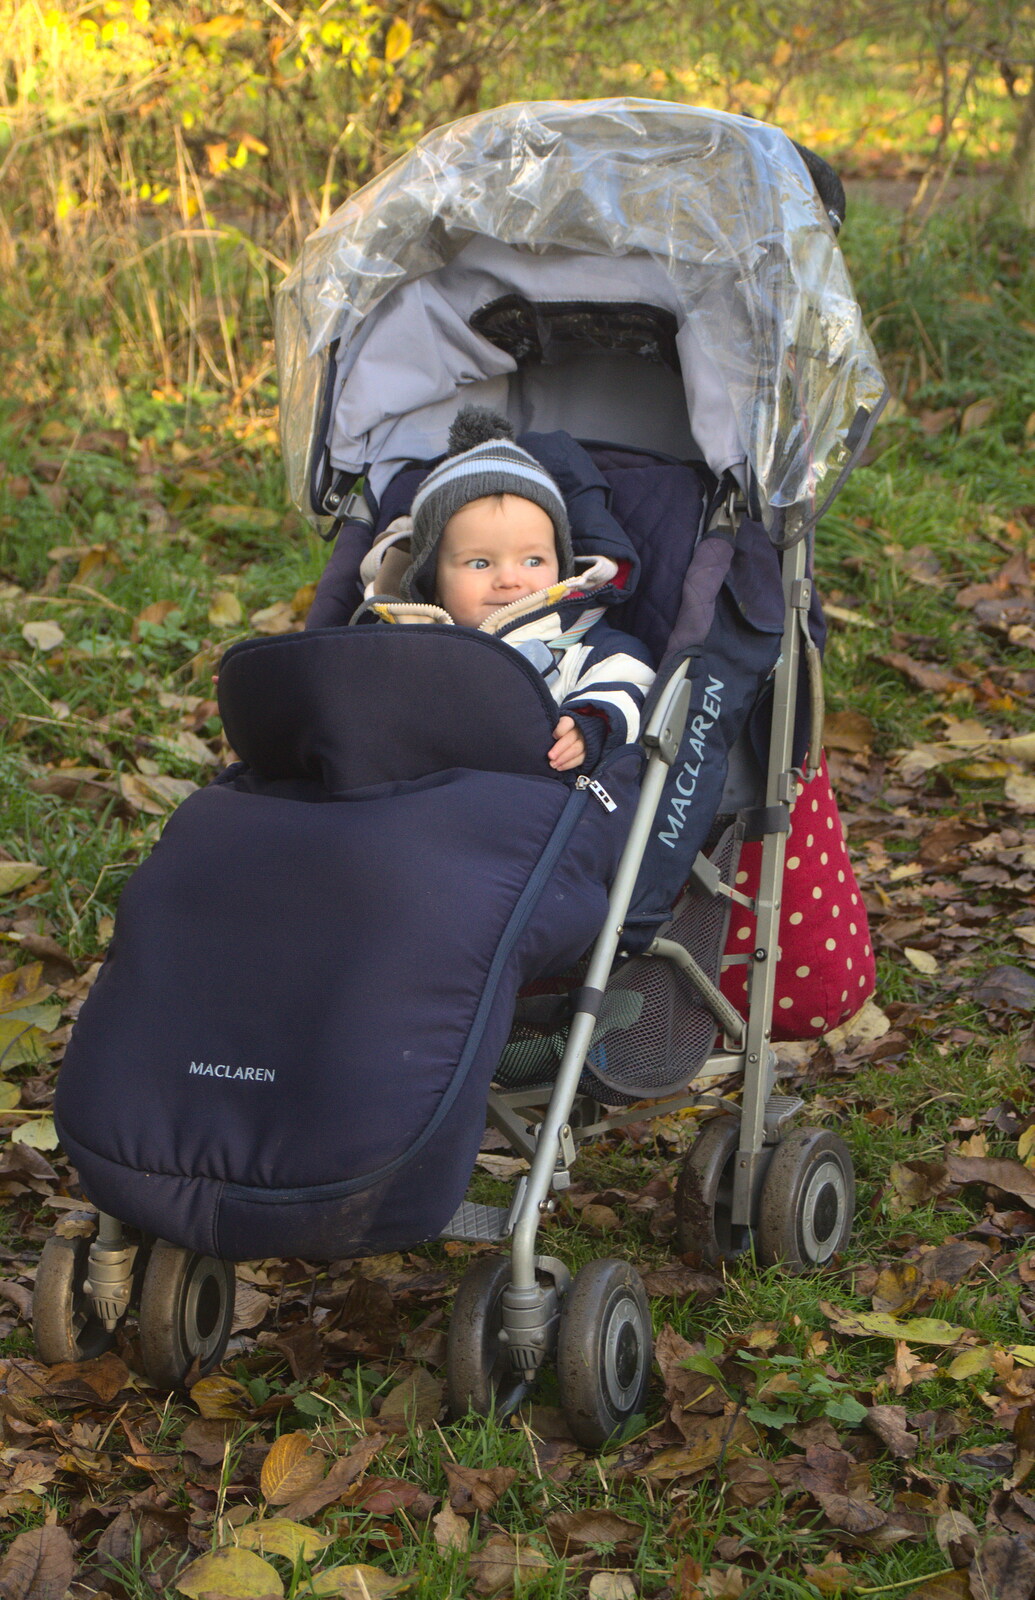 Harry peers out of his buggy from A Busy Day, Southwold and Thornham, Suffolk - 11th November 2012